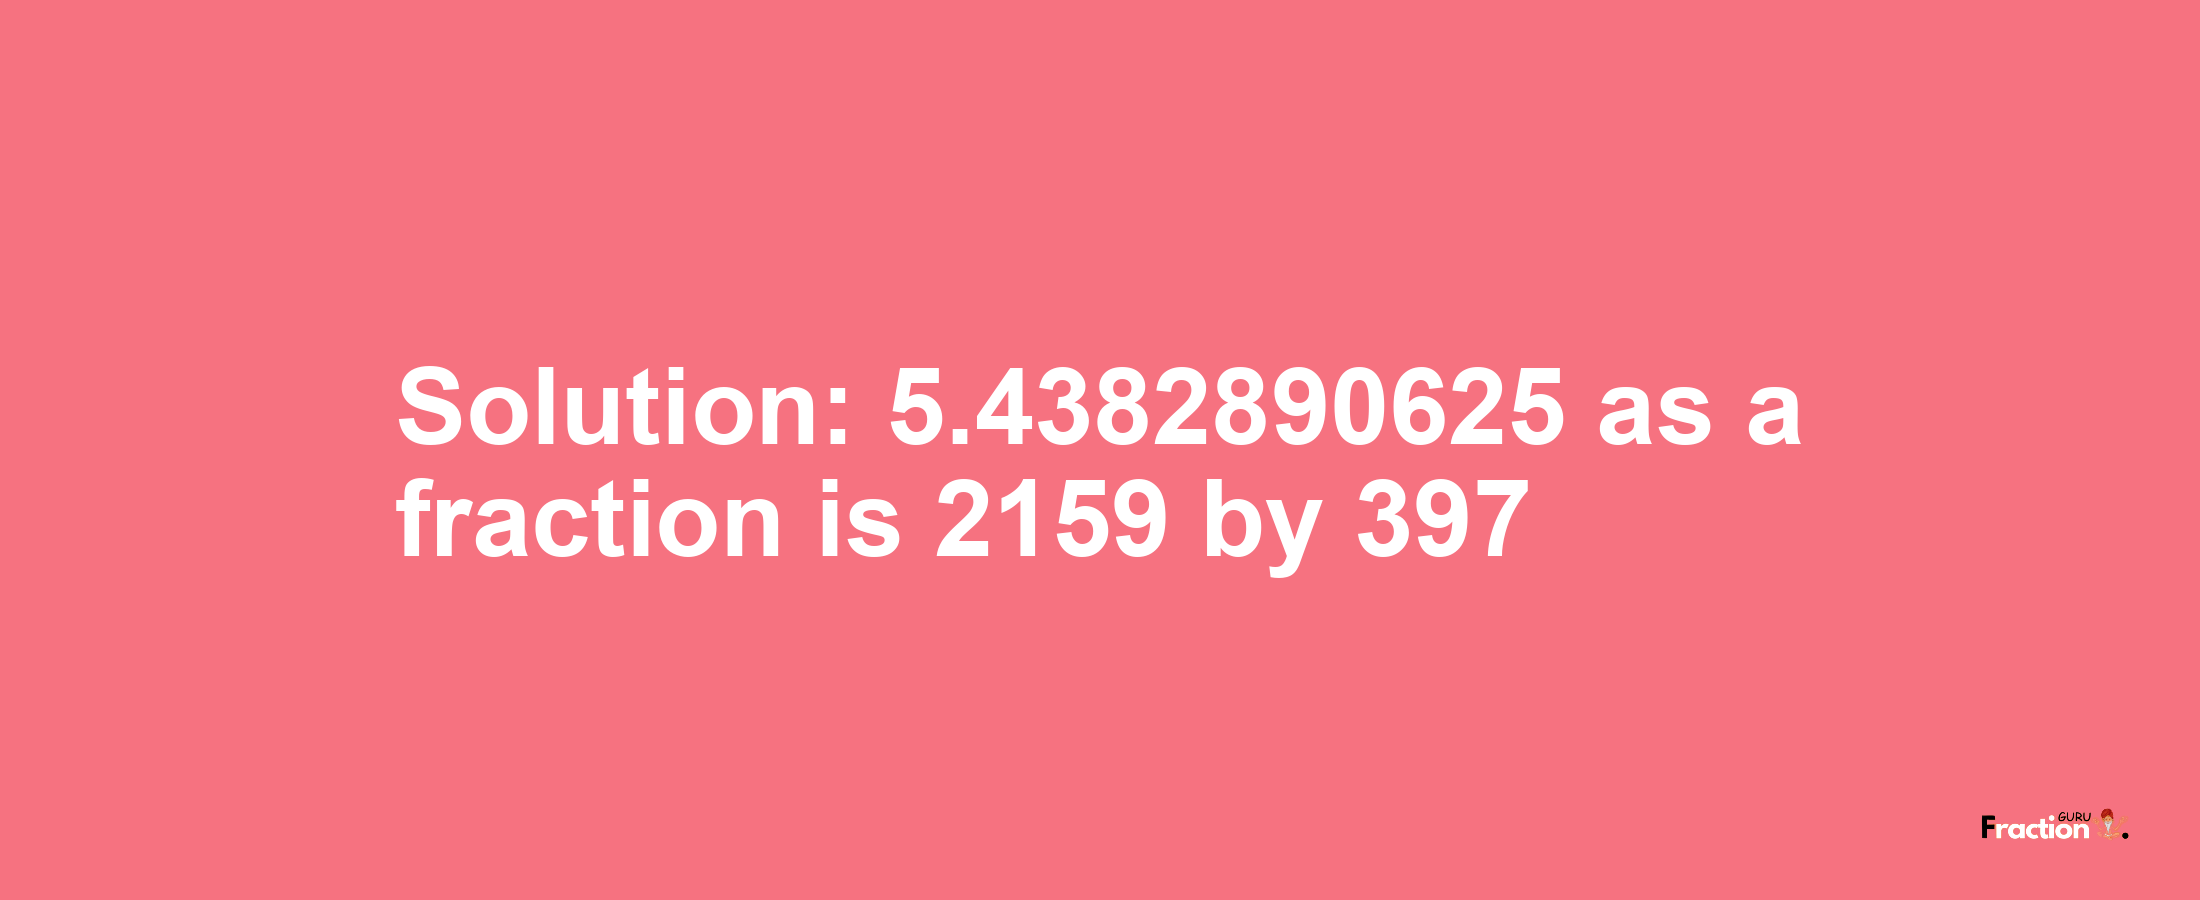 Solution:5.4382890625 as a fraction is 2159/397